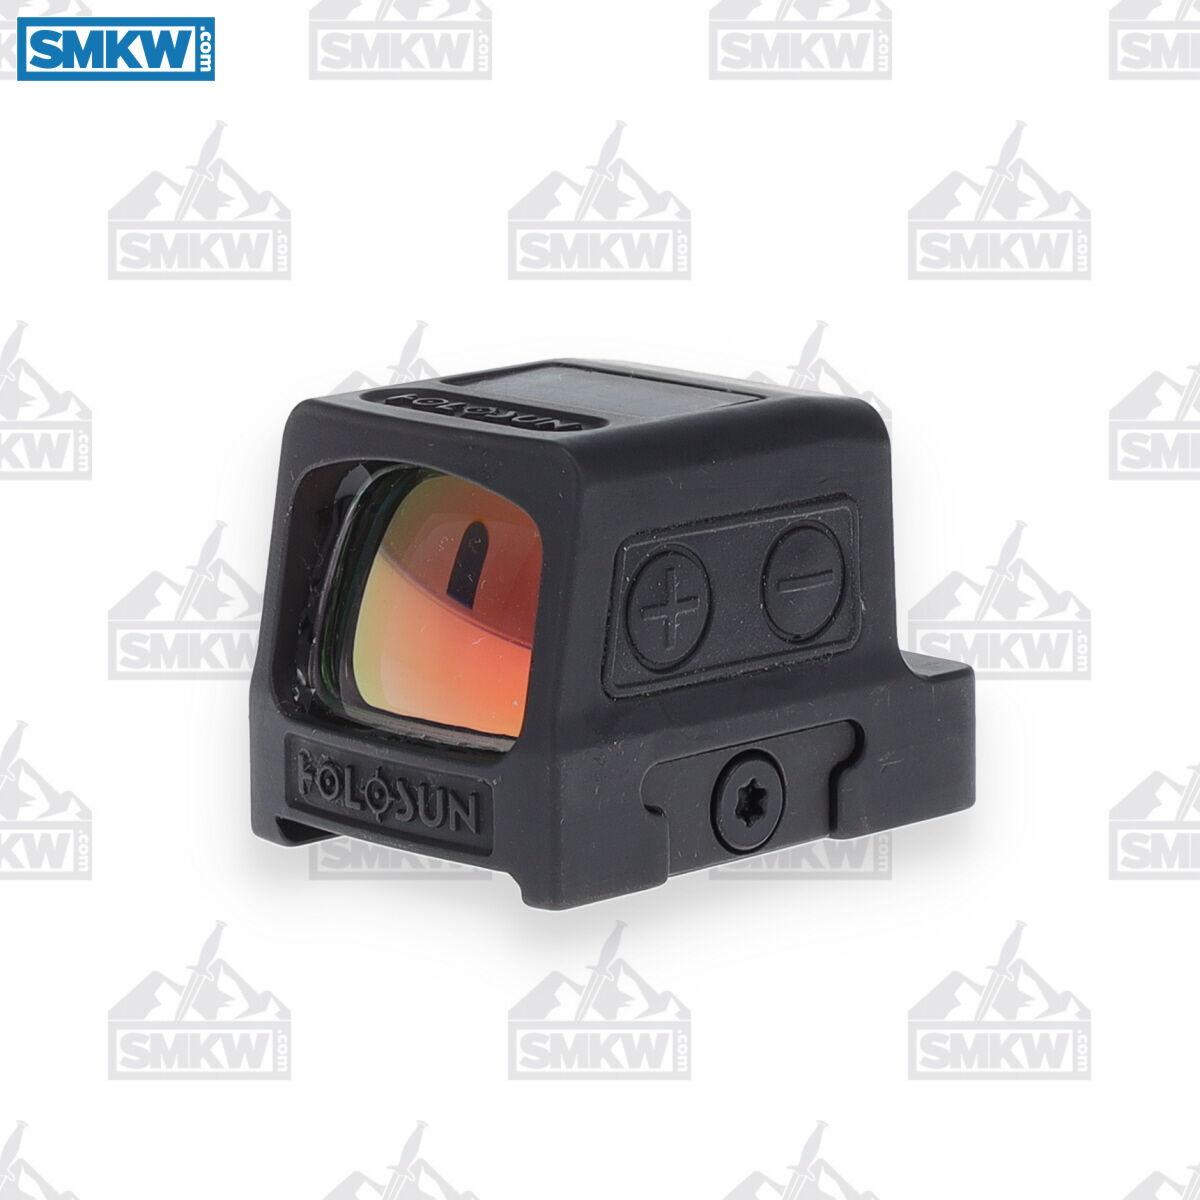 Holosun HE509T-RD Reflex Sight - $279.99 (Free S/H over $75, excl. ammo)